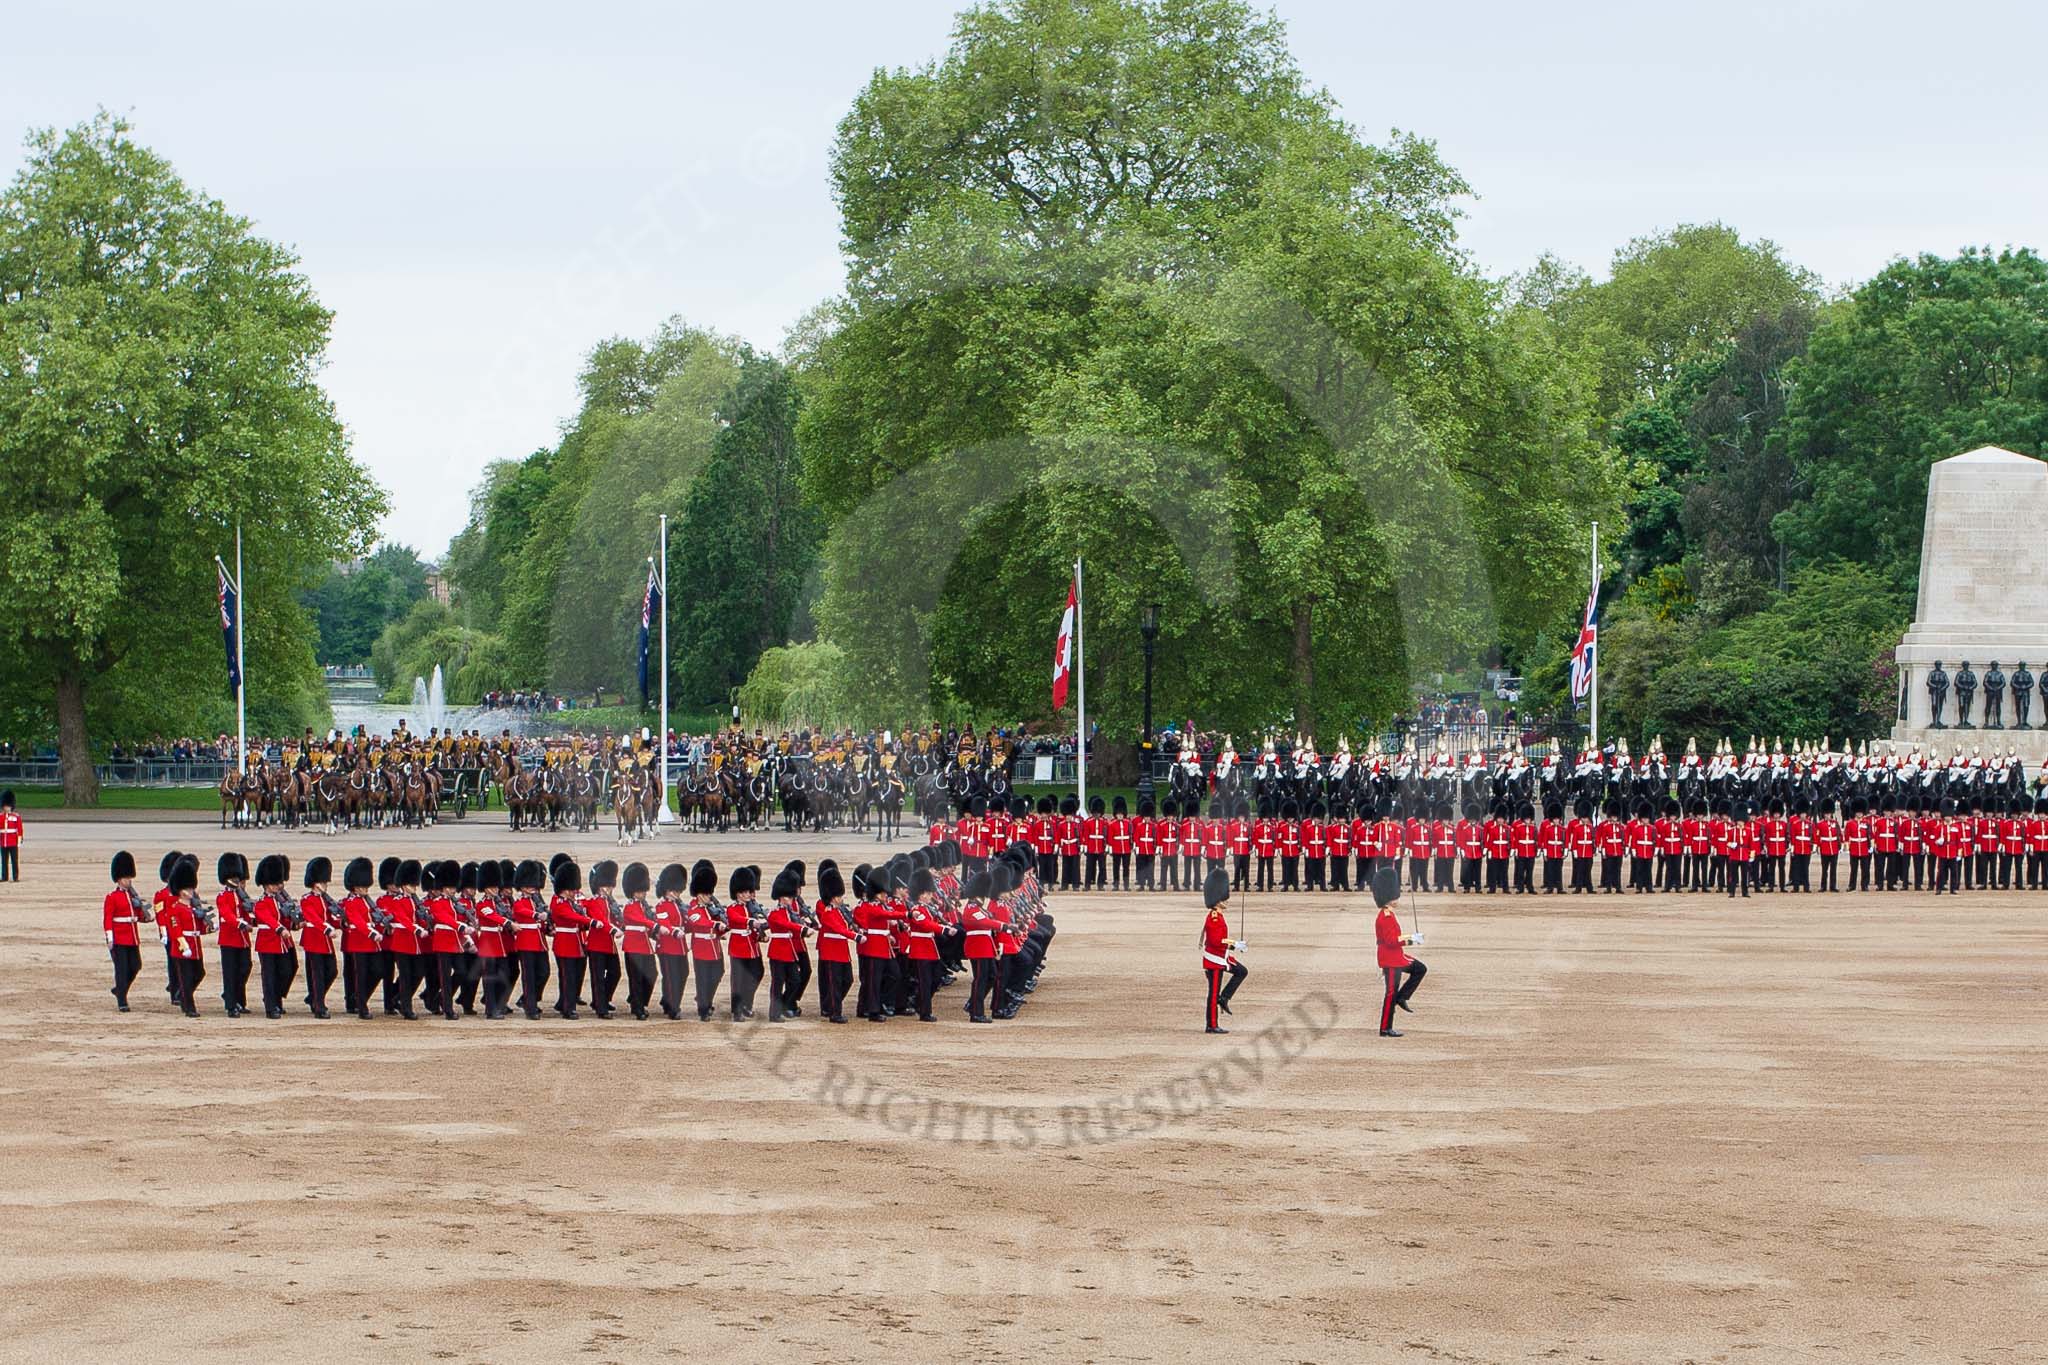 Major General's Review 2013: A wide angle overview of Horse Guards Parade. on the left, No. 1 Guard (Escort for the Colour),1st Battalion Welsh Guards is moving forward to receive the Colour..
Horse Guards Parade, Westminster,
London SW1,

United Kingdom,
on 01 June 2013 at 11:16, image #375